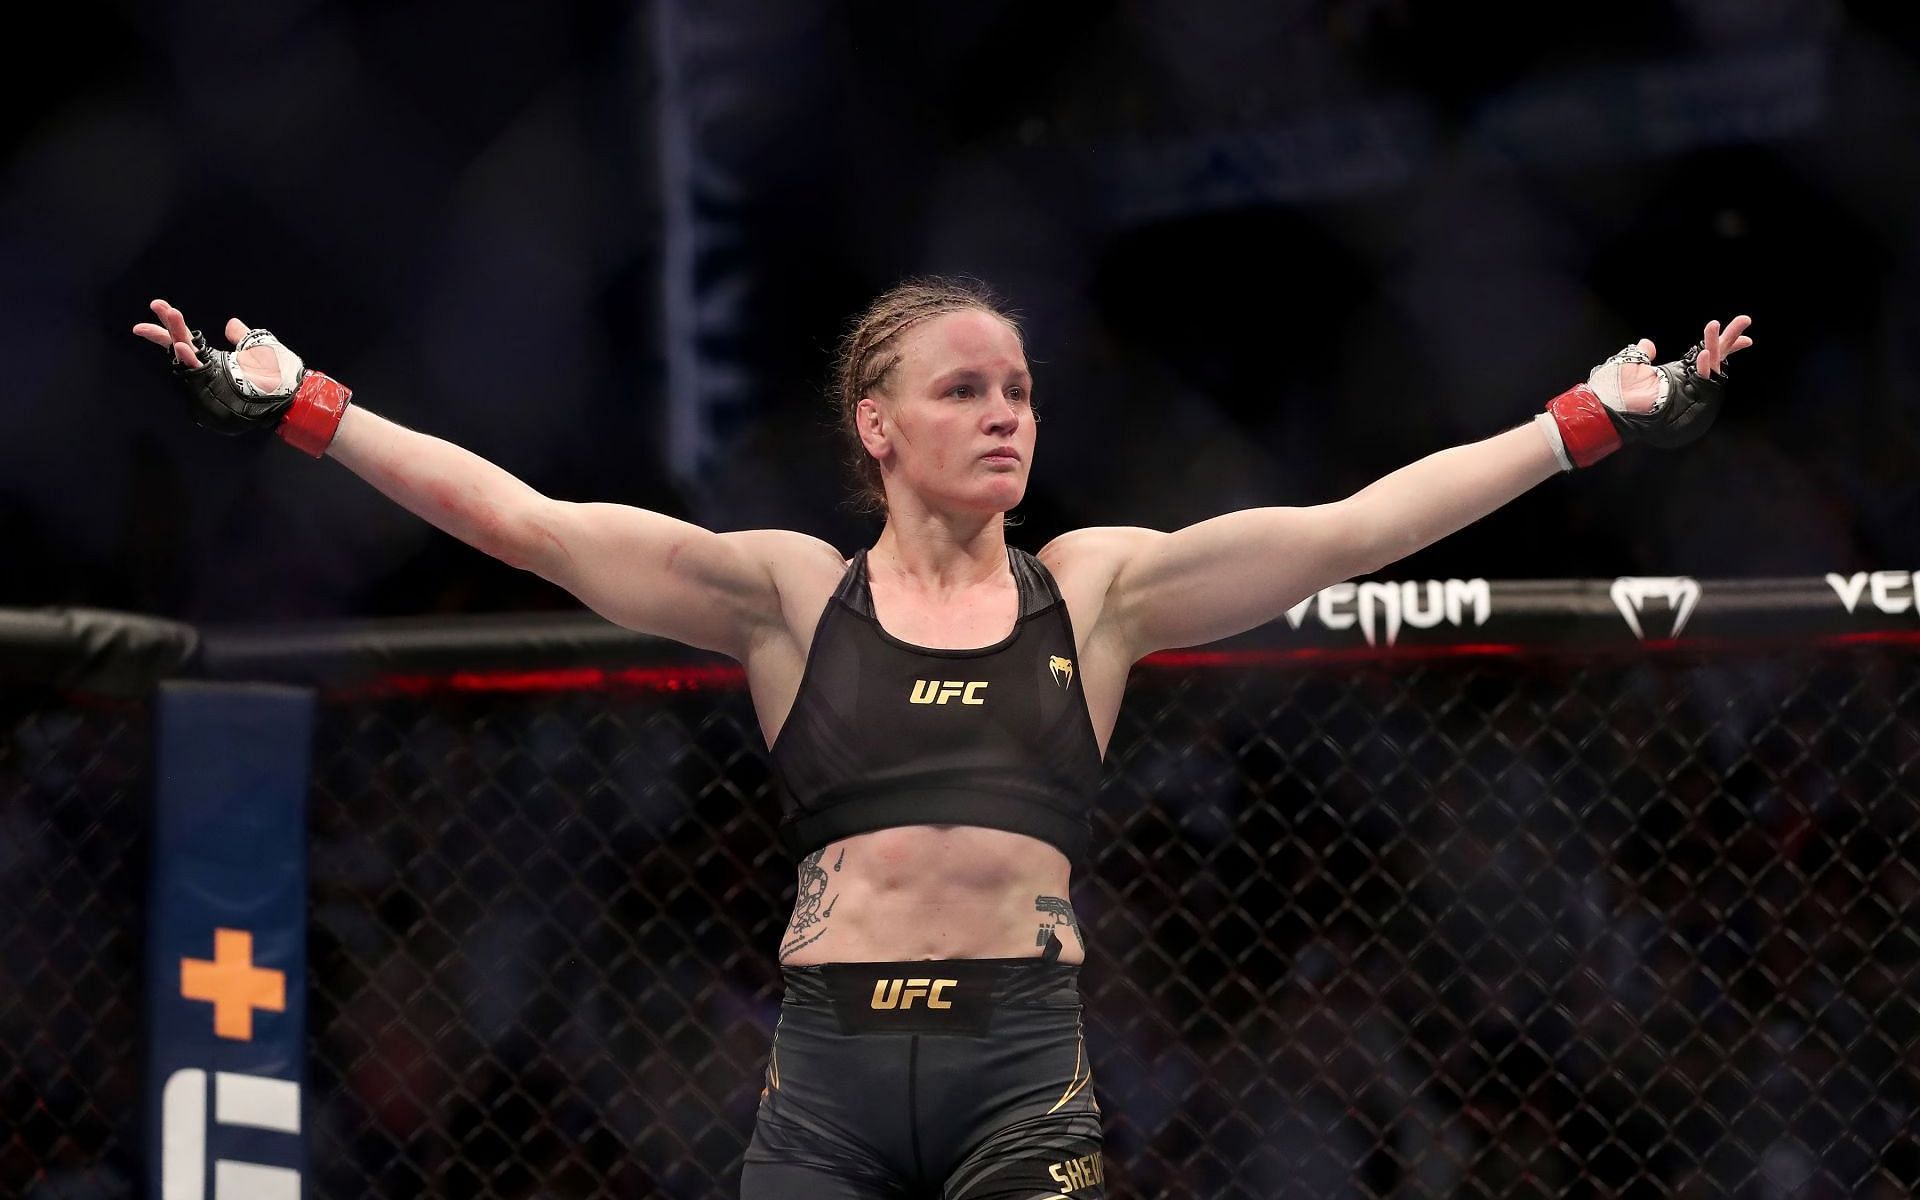 Is Valentina Shevchenko the greatest female fighter in UFC history?